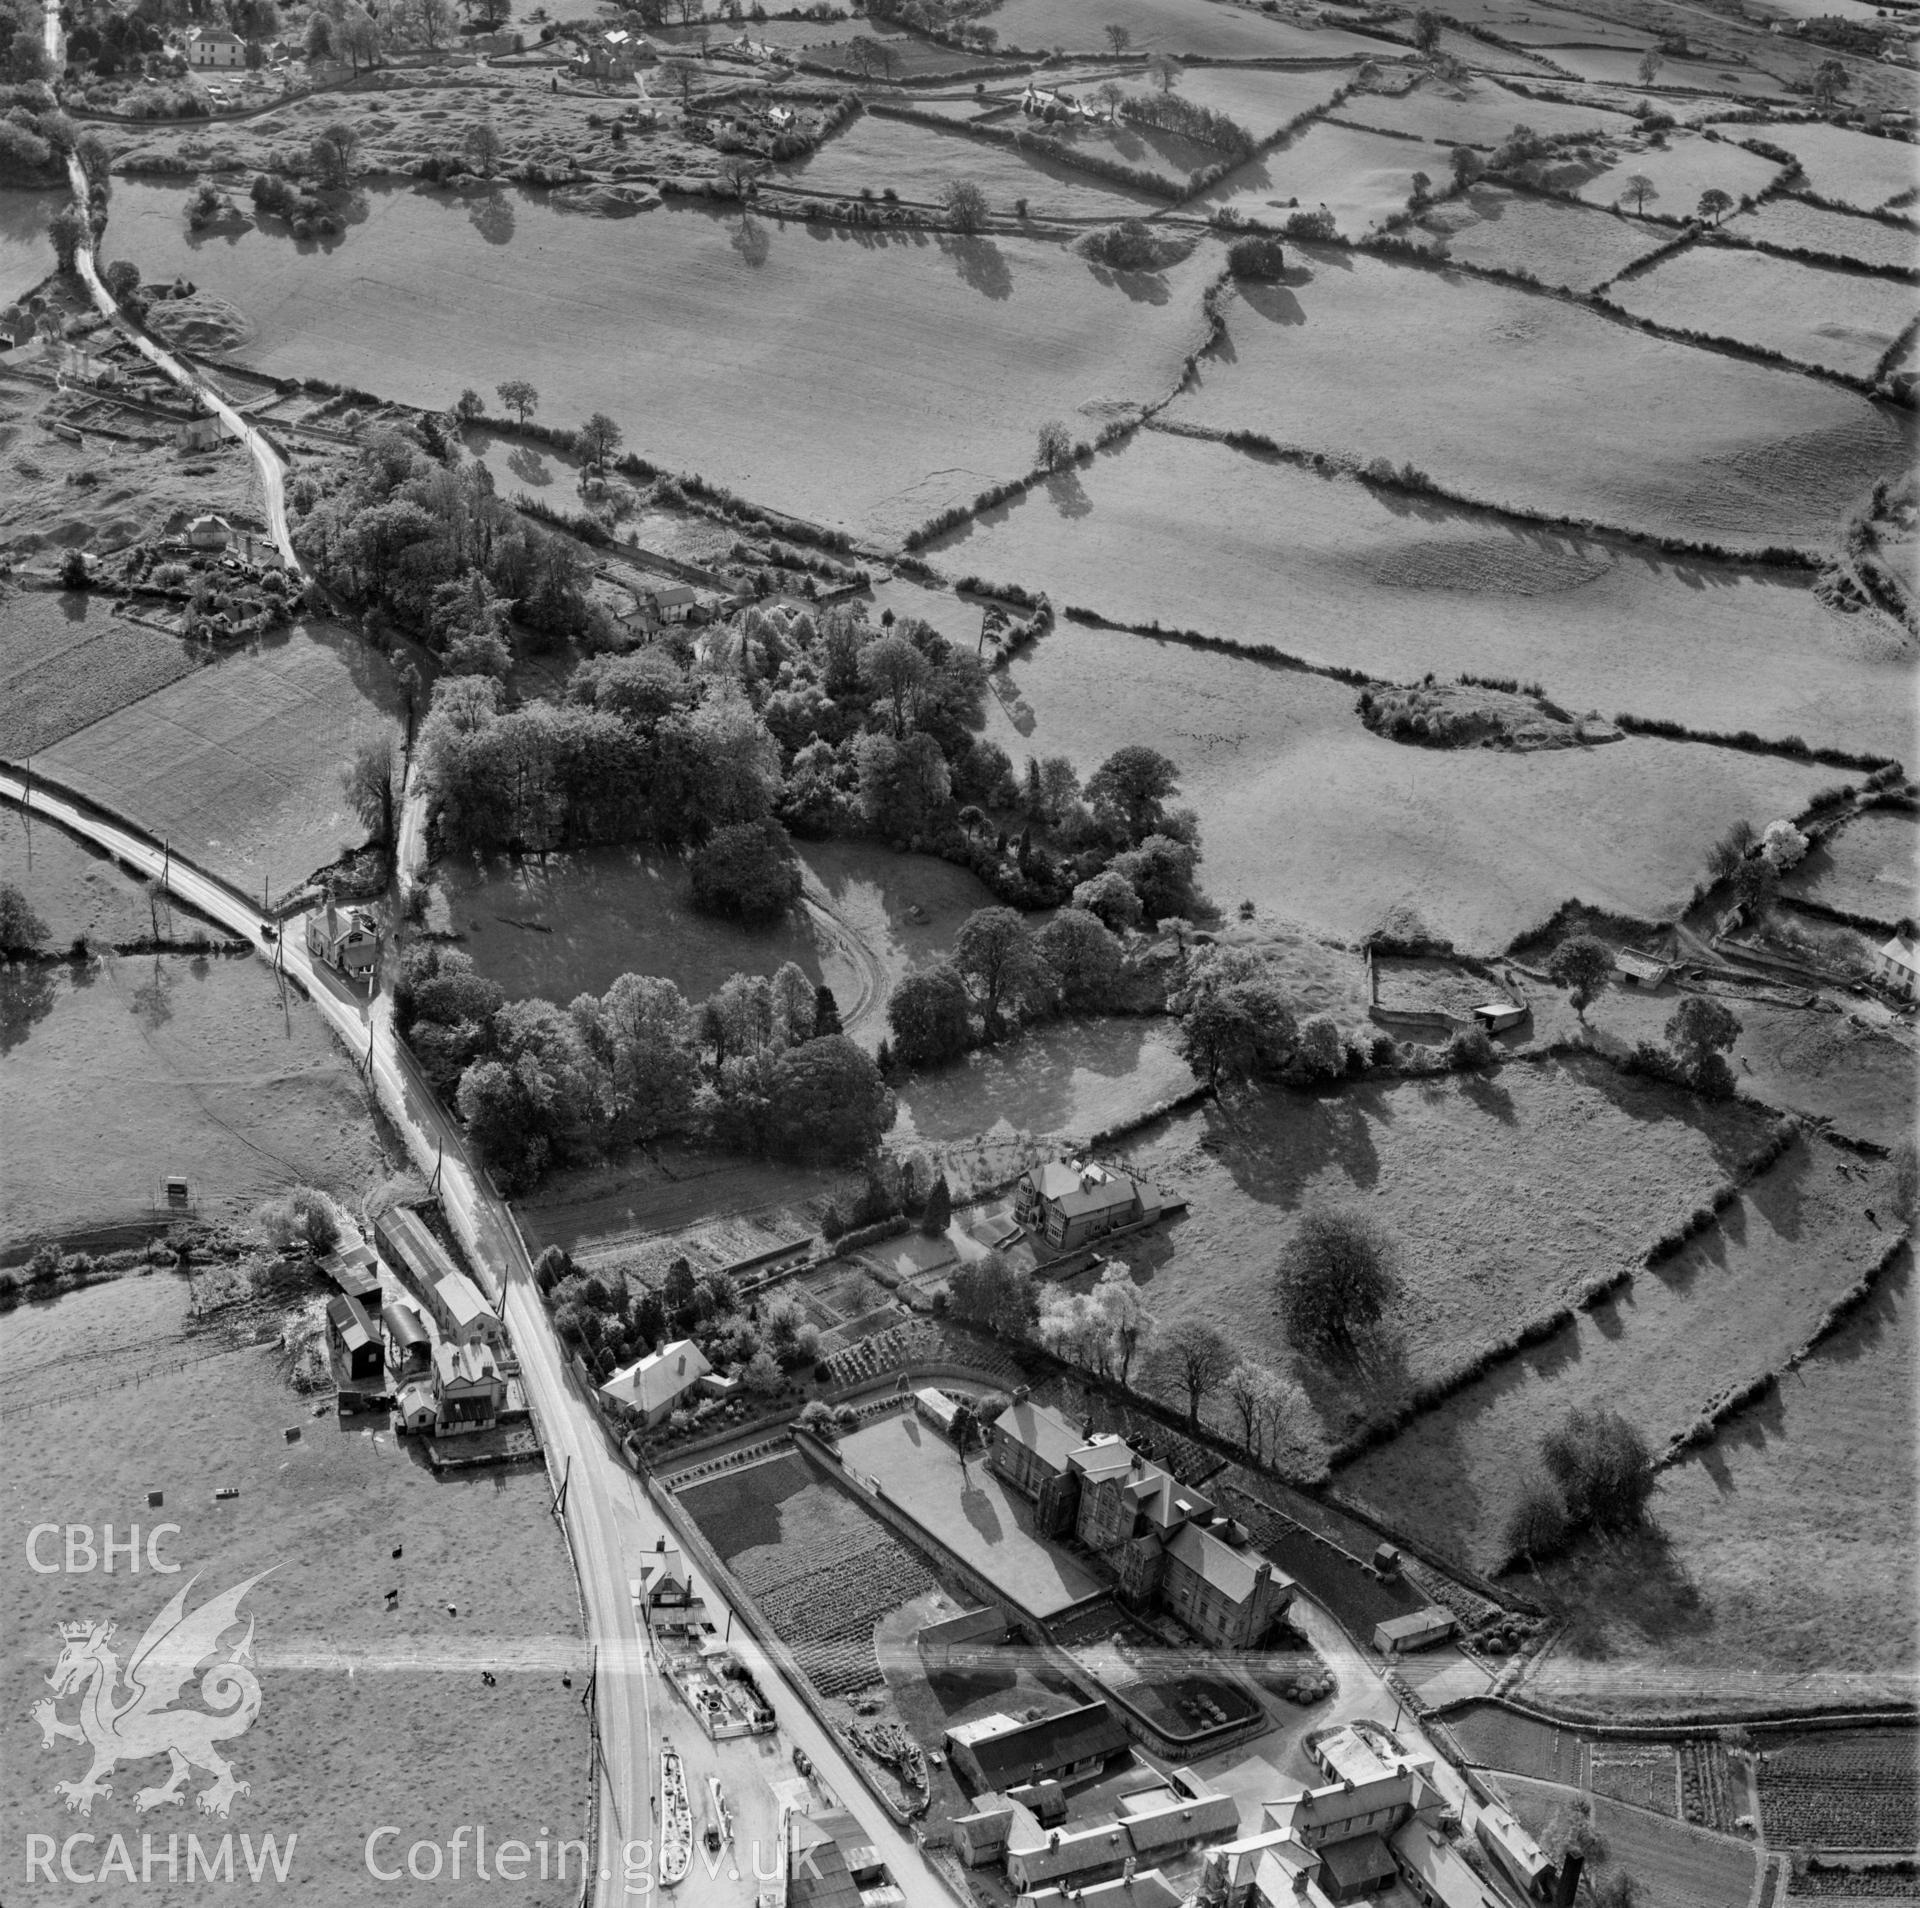 View of area south of Holywell showing Stamford Dairy and Lluesty Hospital. Labelled "Holywell Textile Mills Ltd., Highfield & Pistyll".